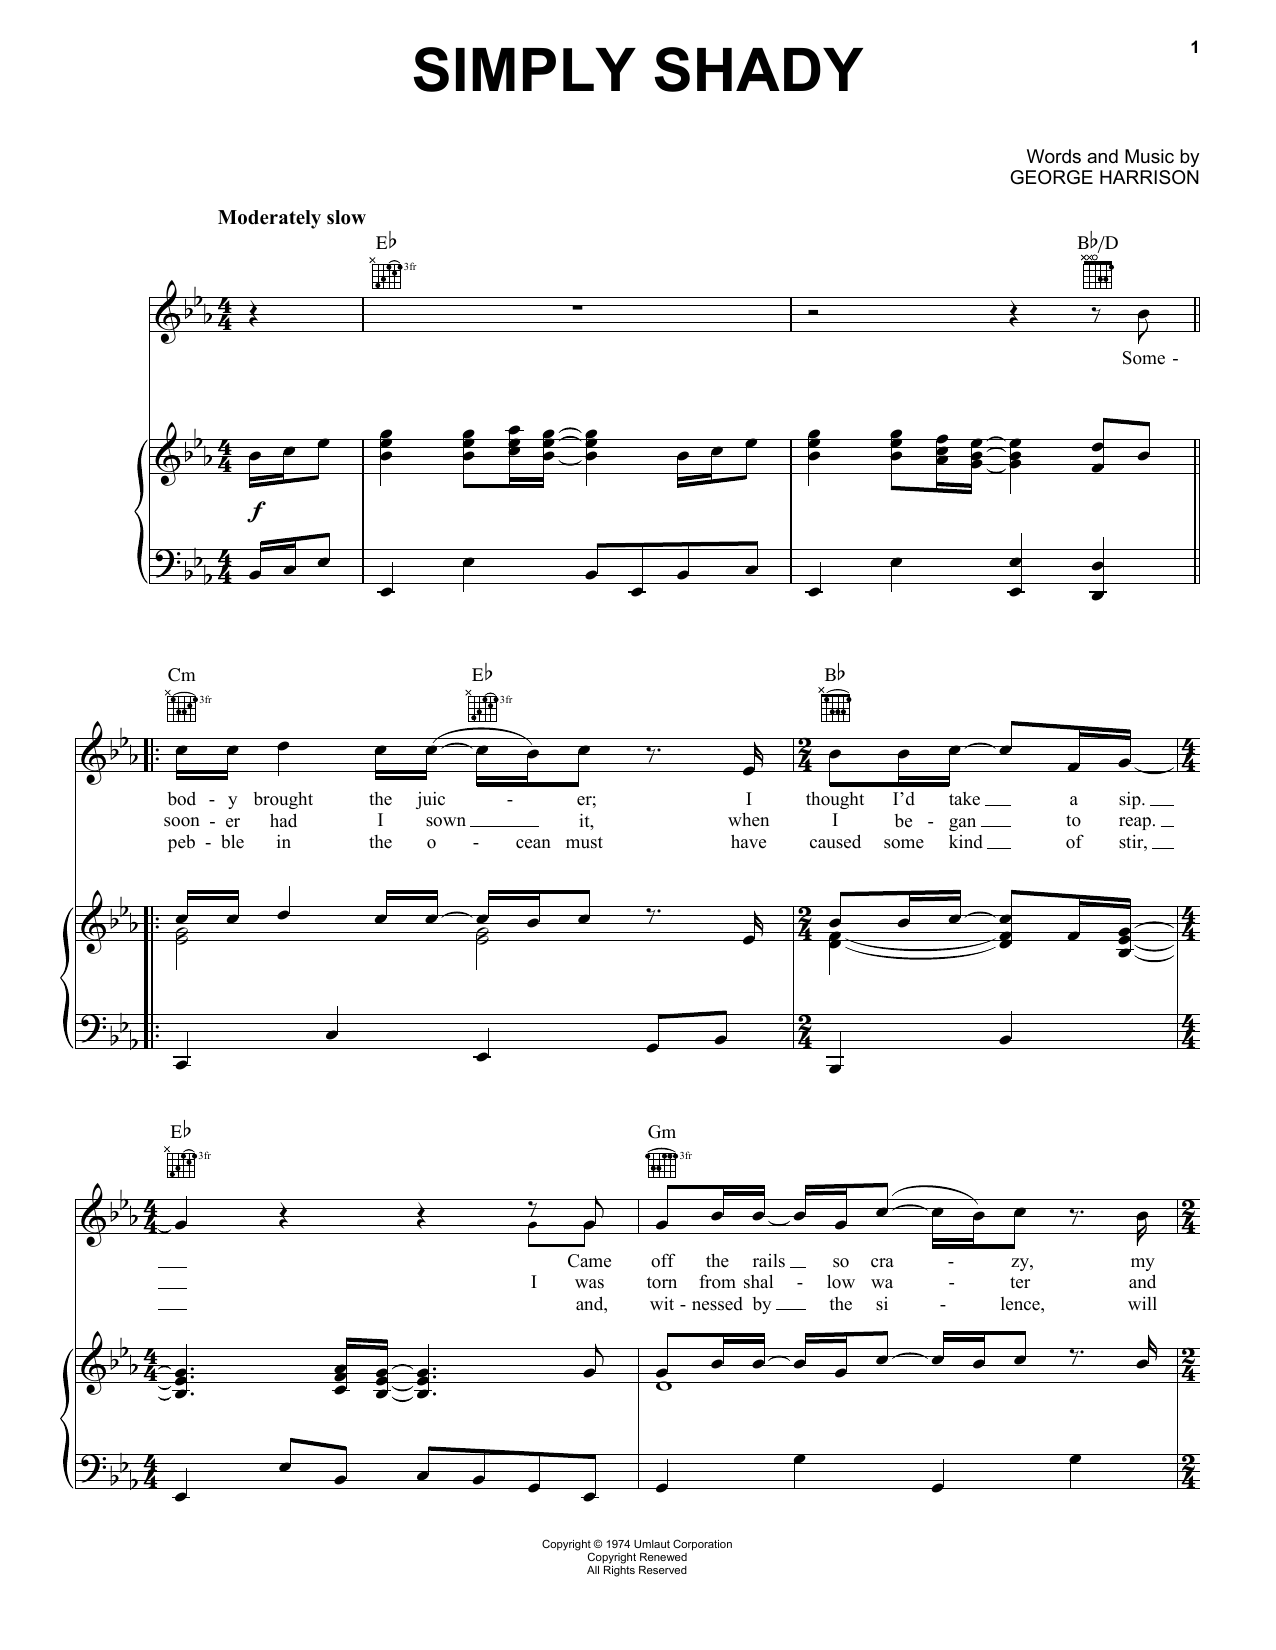 Download George Harrison Simply Shady Sheet Music